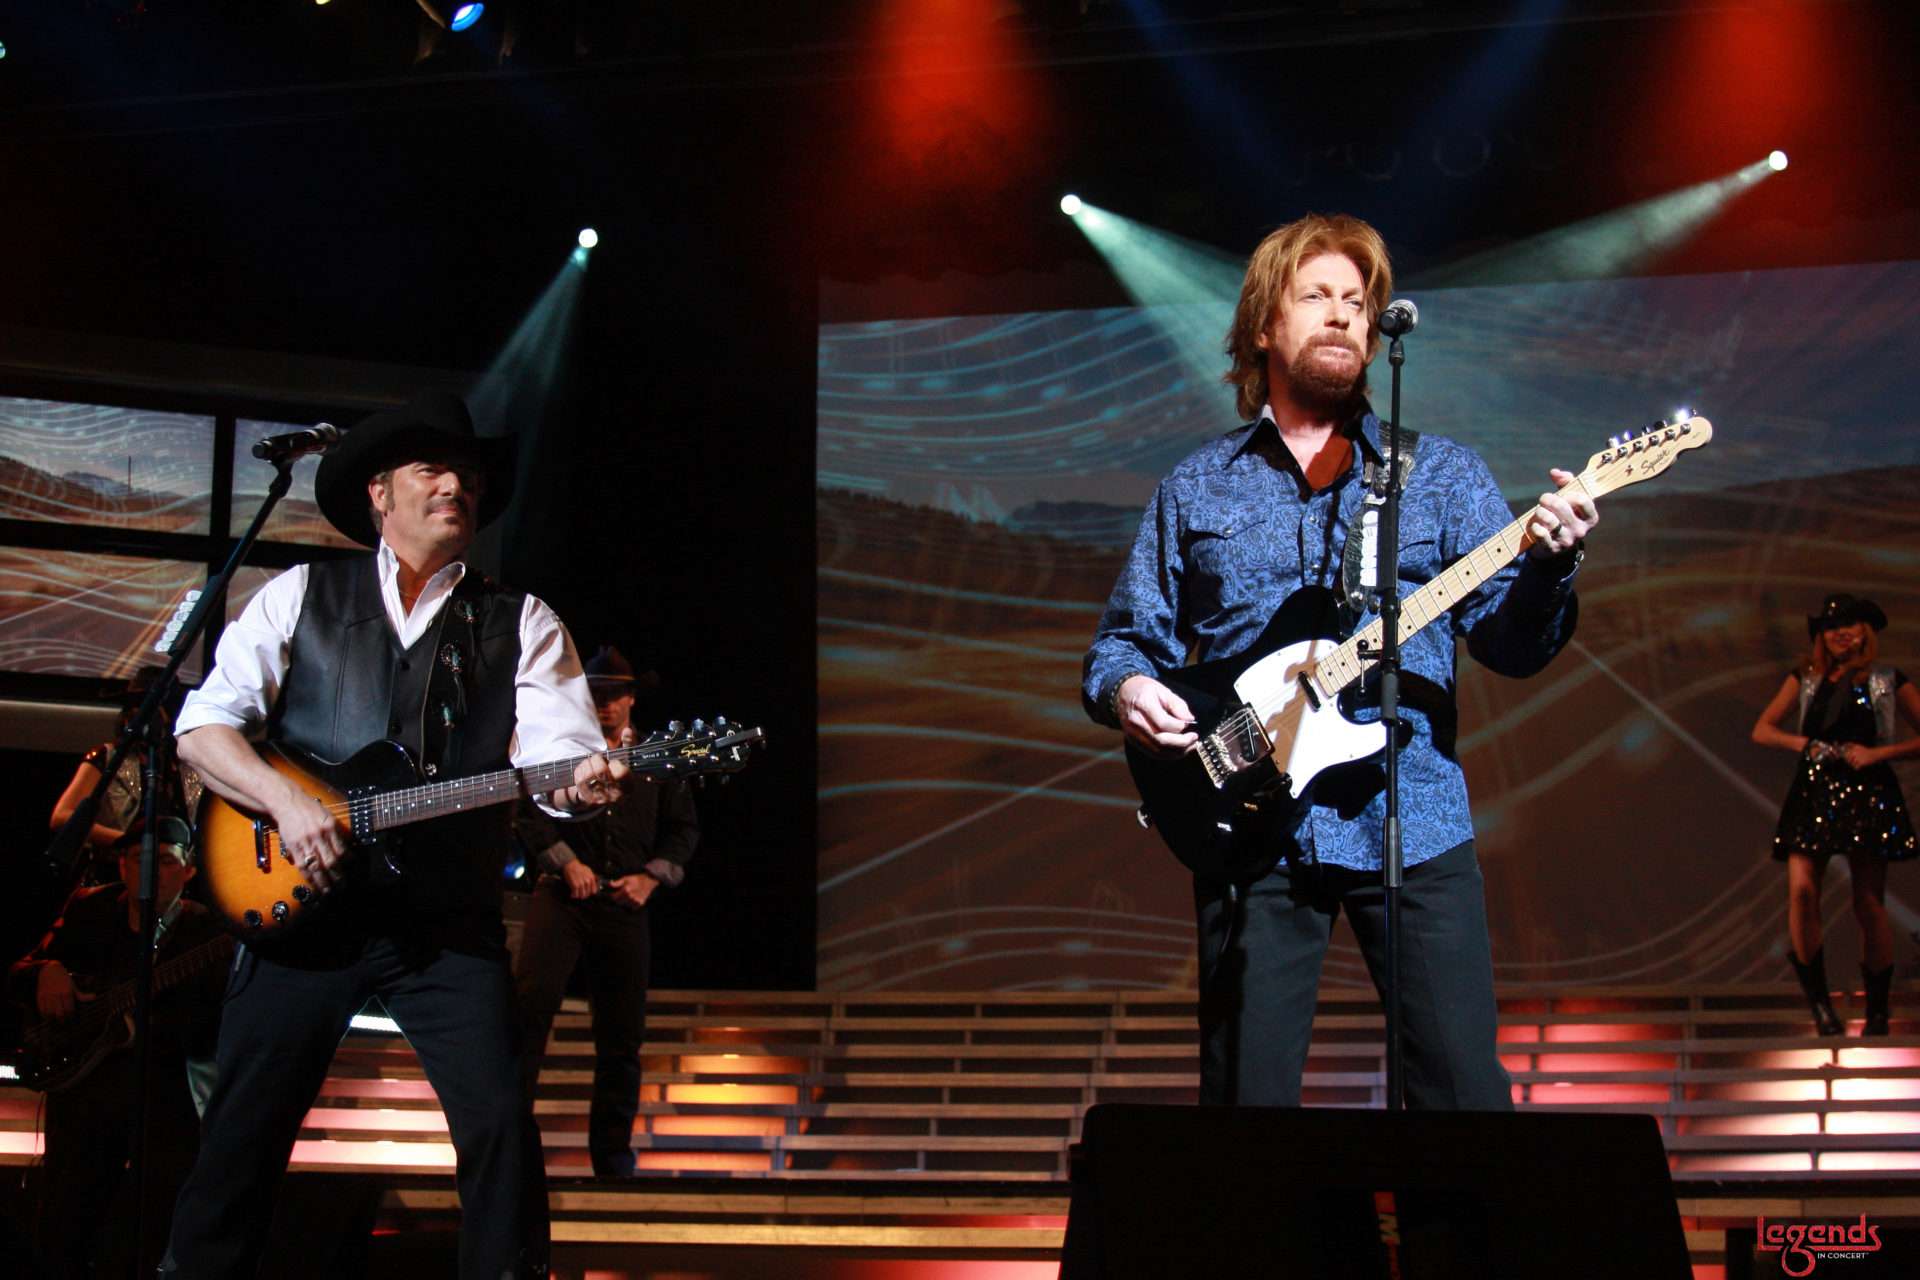 legends in concert brooks & dunn larry turner and doug brewin